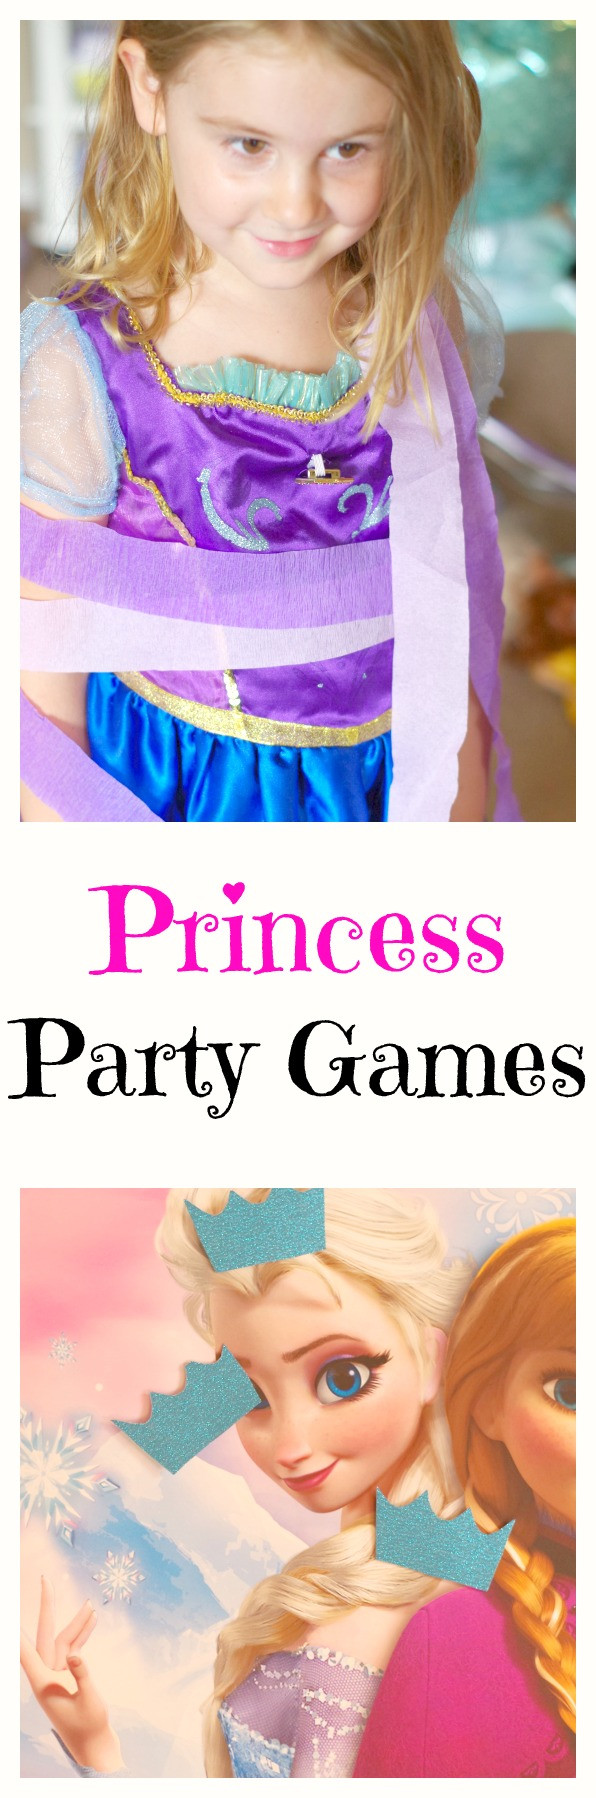 Princess Birthday Party Games
 Princess Party Games – Val Event Gal